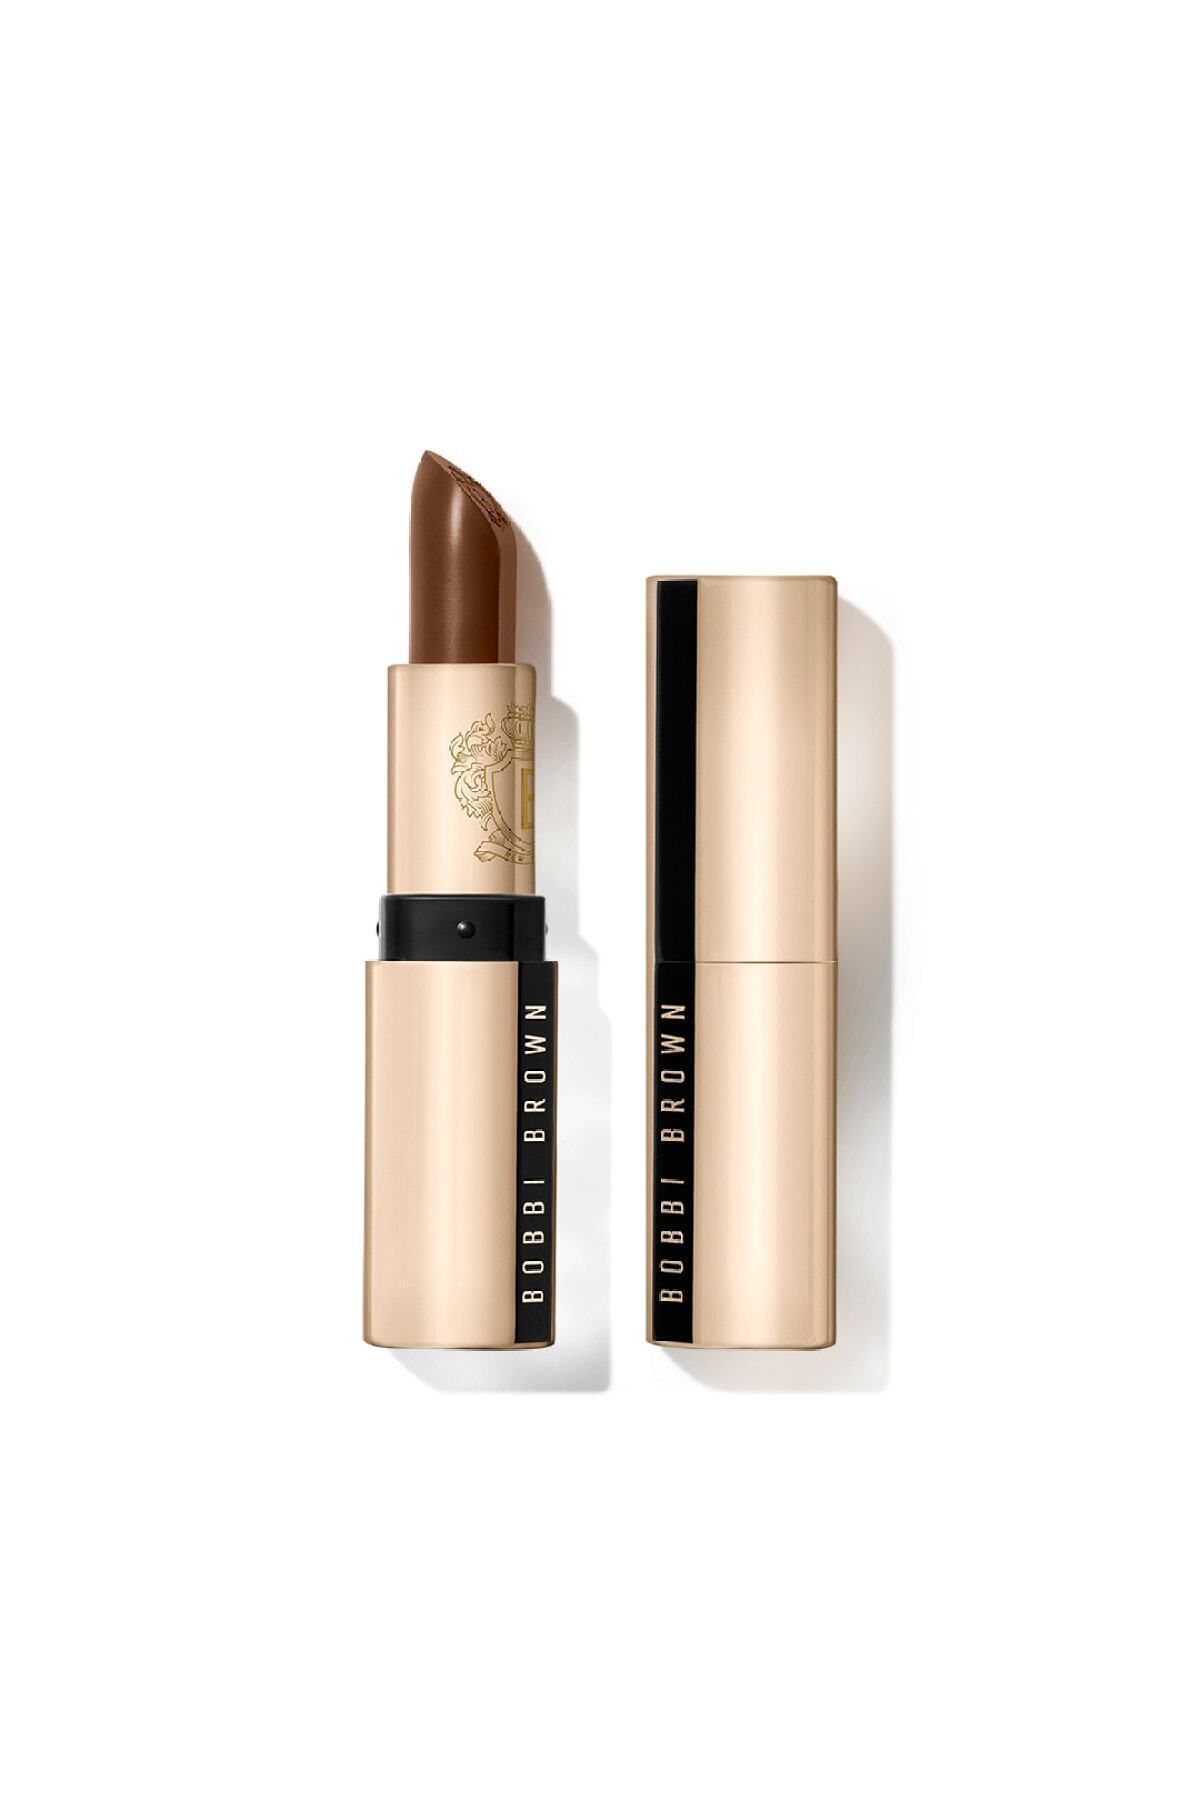 Bobbi Brown LUXE LİPSTİCK INTENSELY PİGMENTED SATİN FİNİSH LİPSTİCK - BROWNSTONE 3.5G PSSN1373